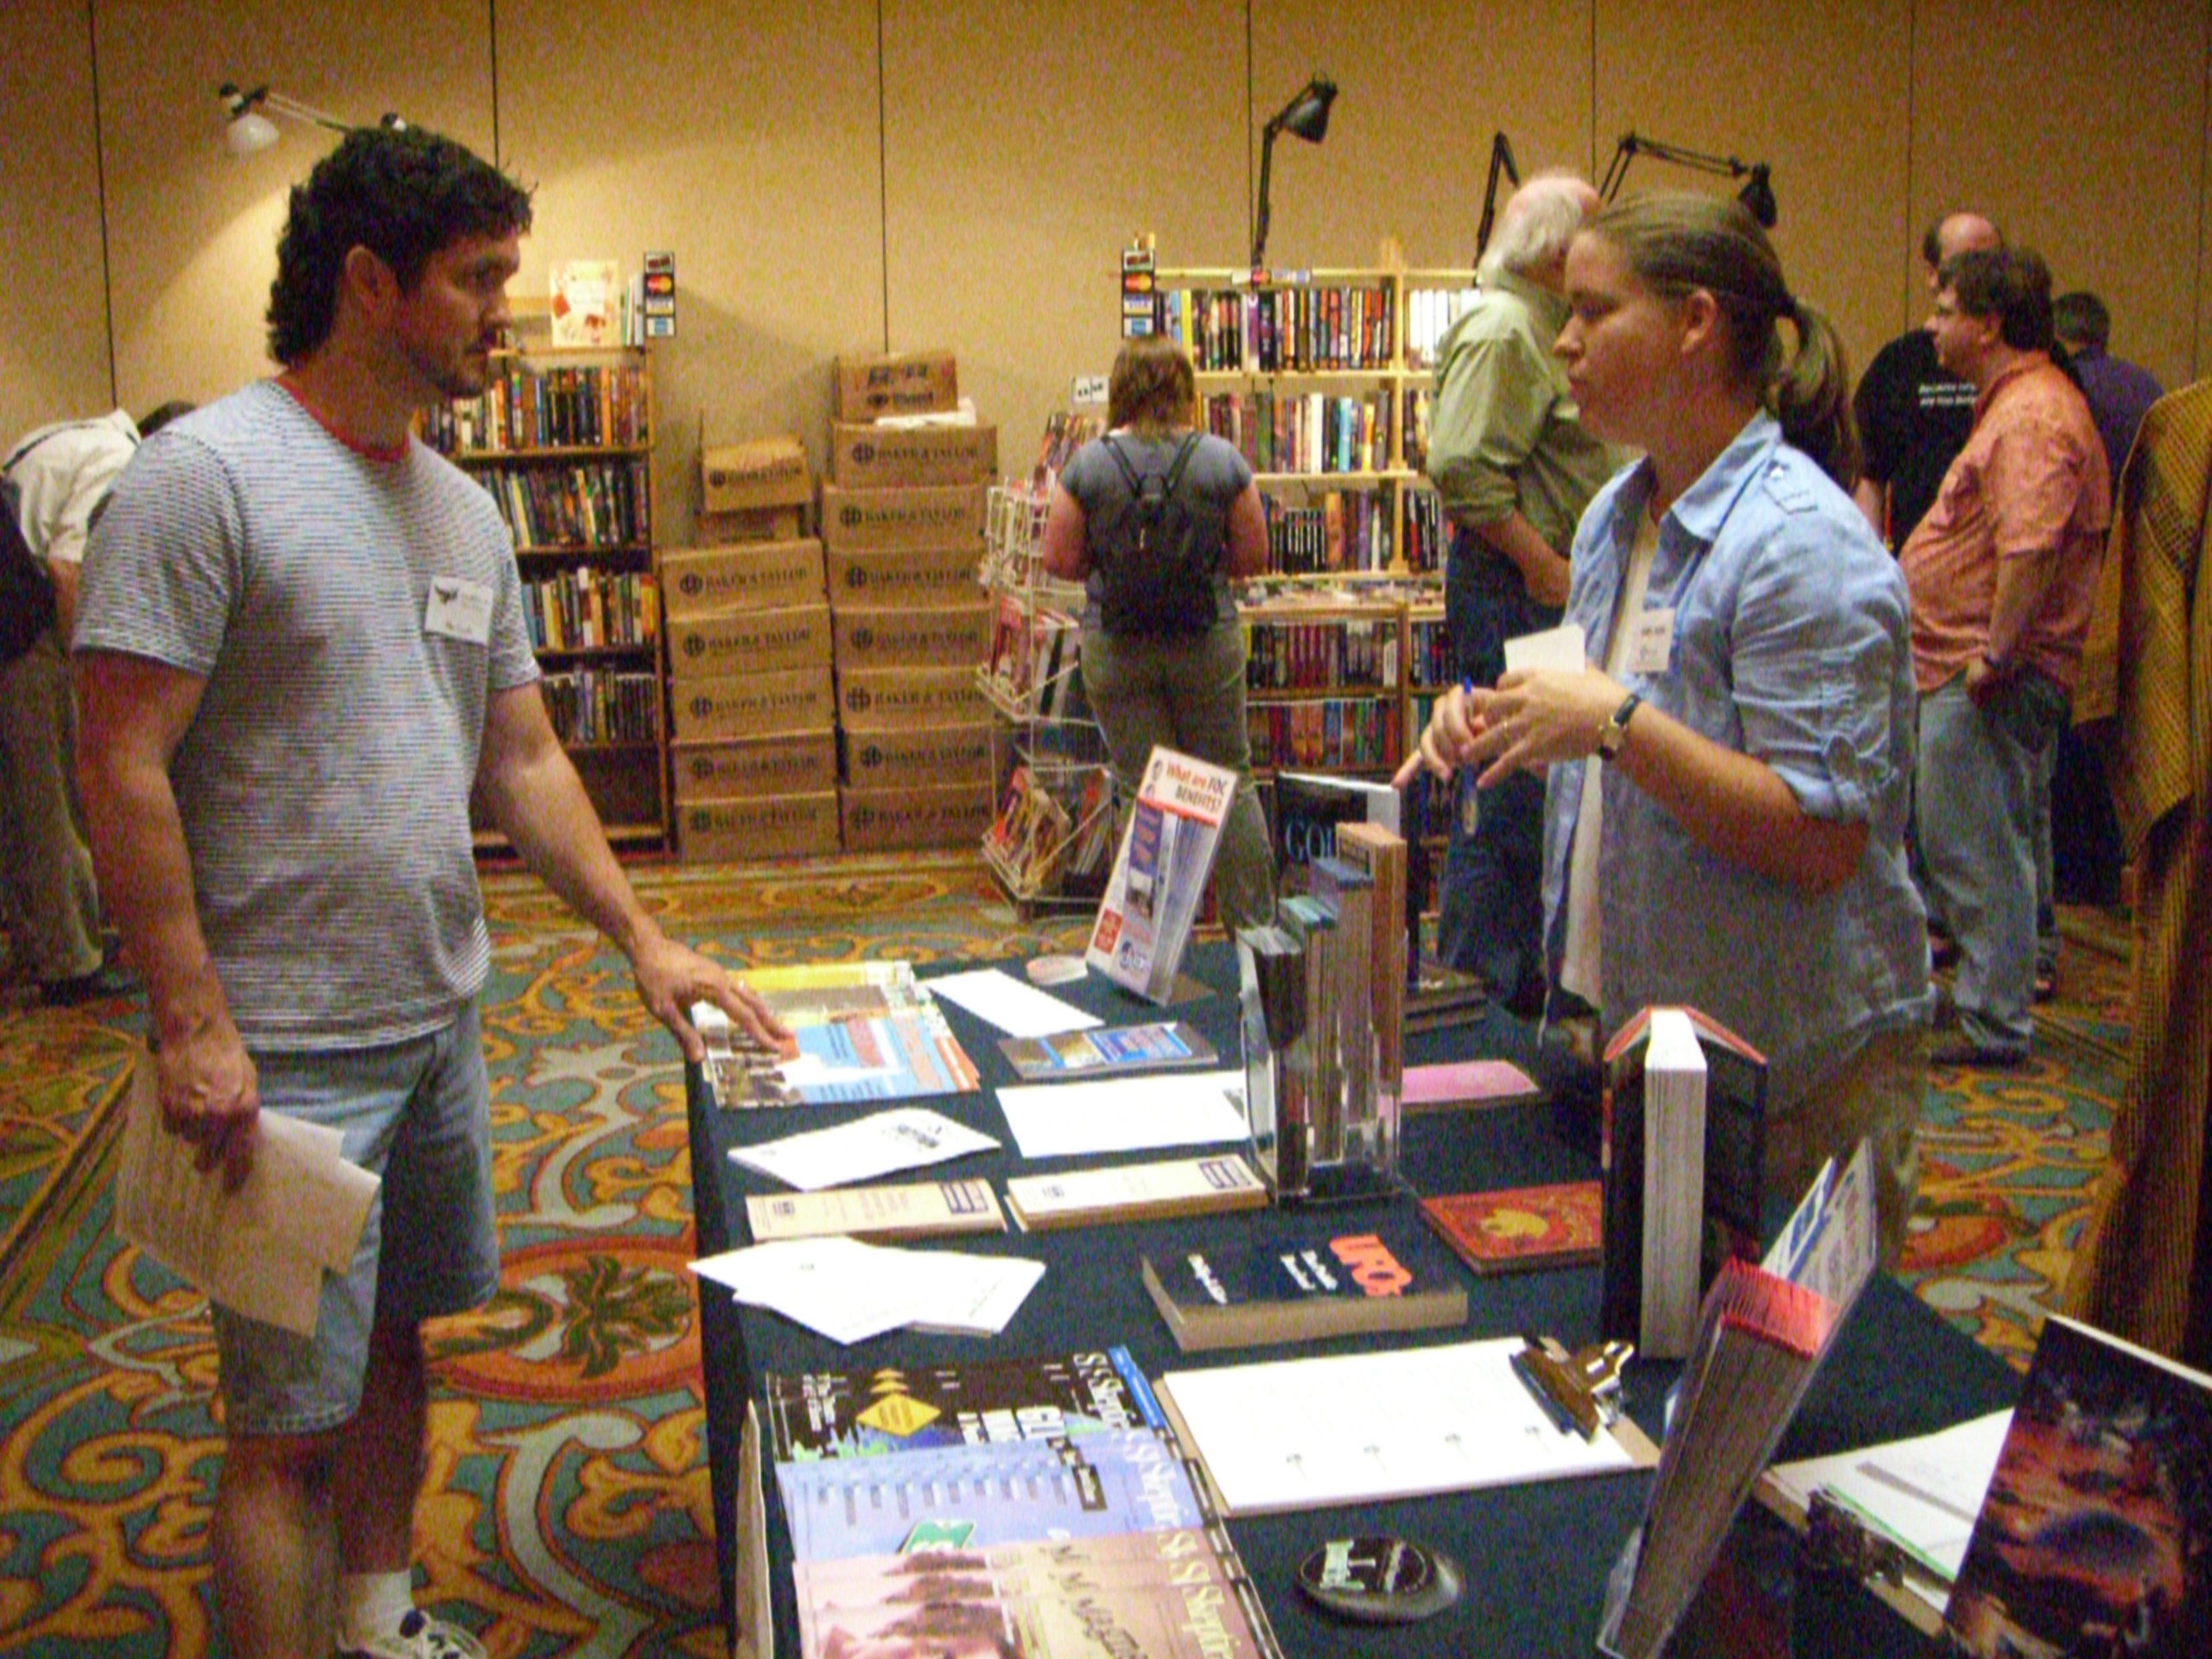 CFI table at the ArmadilloCon 2007: talking with a congoer